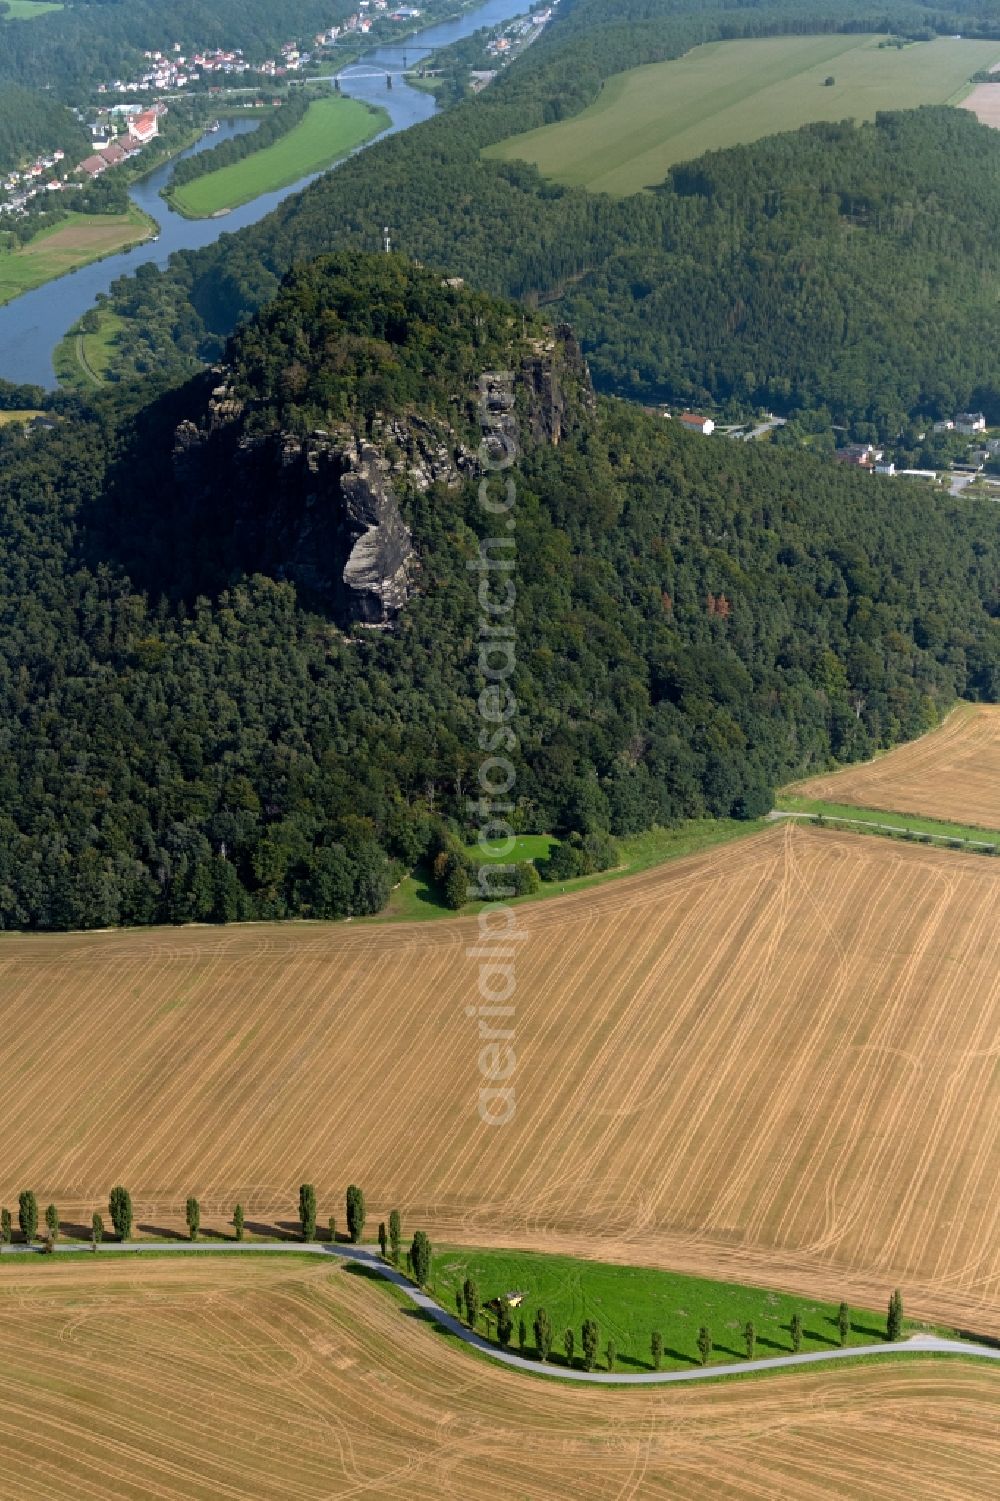 Porschdorf from above - View of the Lilienstein and the Elbe Valley in Saxon Switzerland near Prossen in the state of Saxony. The landscape on the banks of the Elbe is part of the Saxon Switzerland National Park